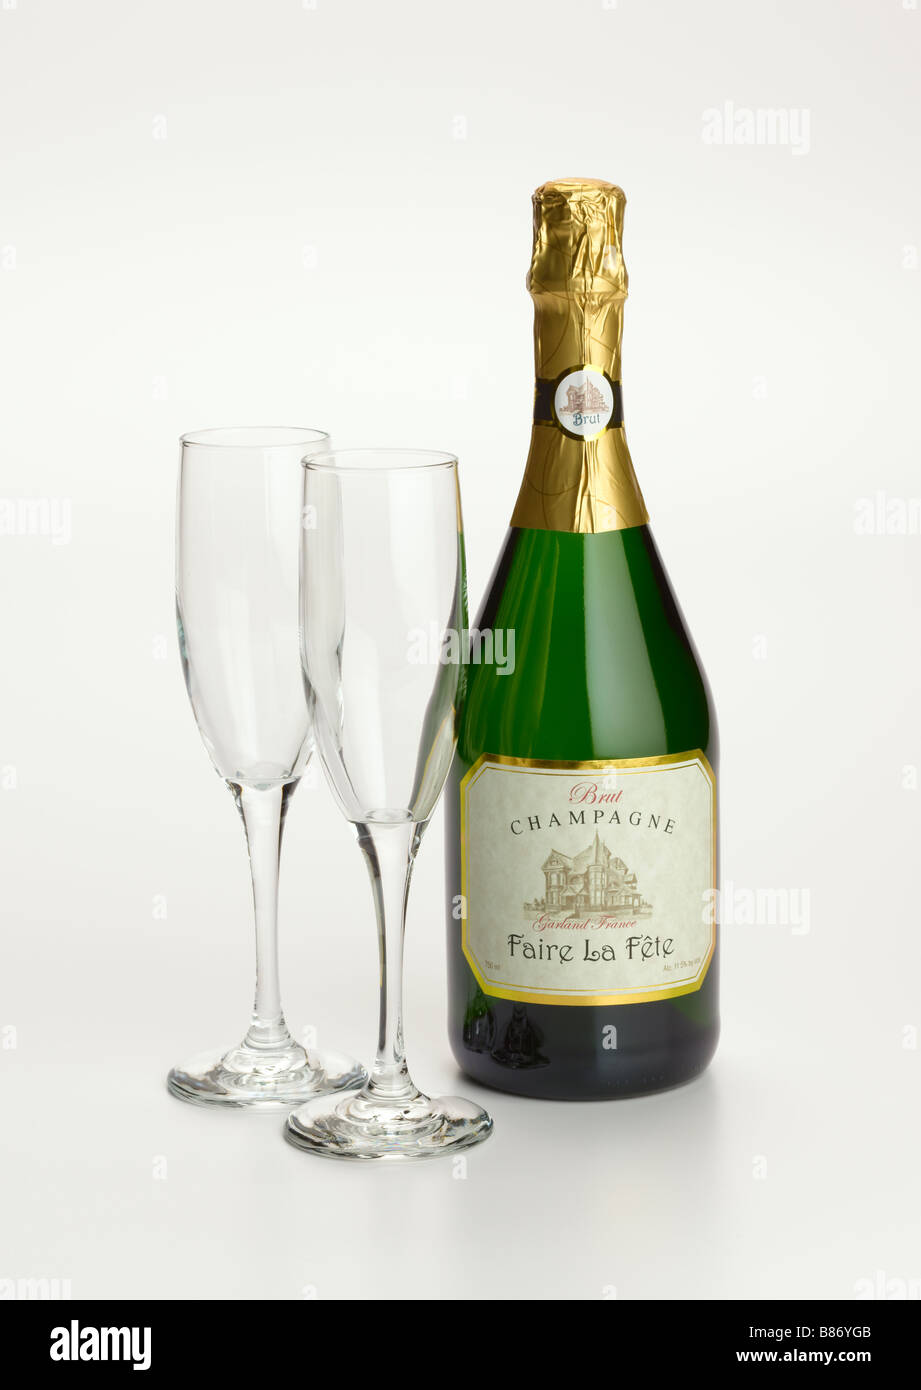 Champagne bottle with glasses Stock Photo